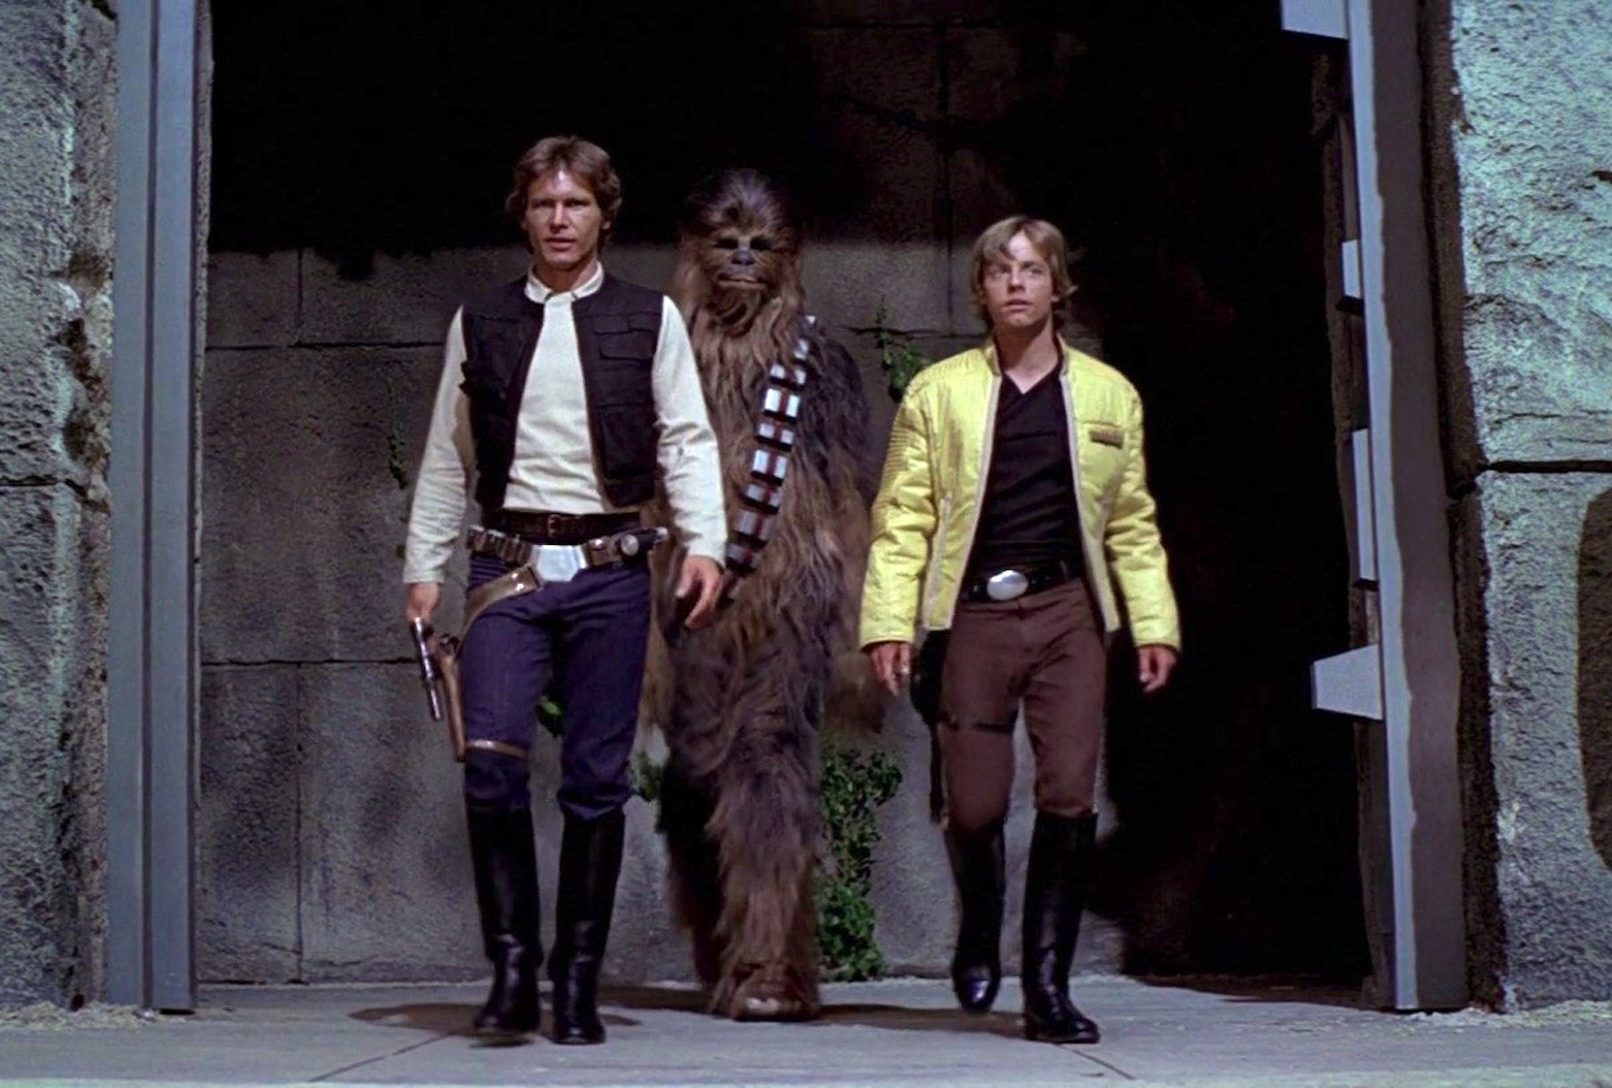 Harrison Ford, Mark Hamill, Peter Mayhew, and Derek Lyons in Star Wars: Episode IV - A New Hope